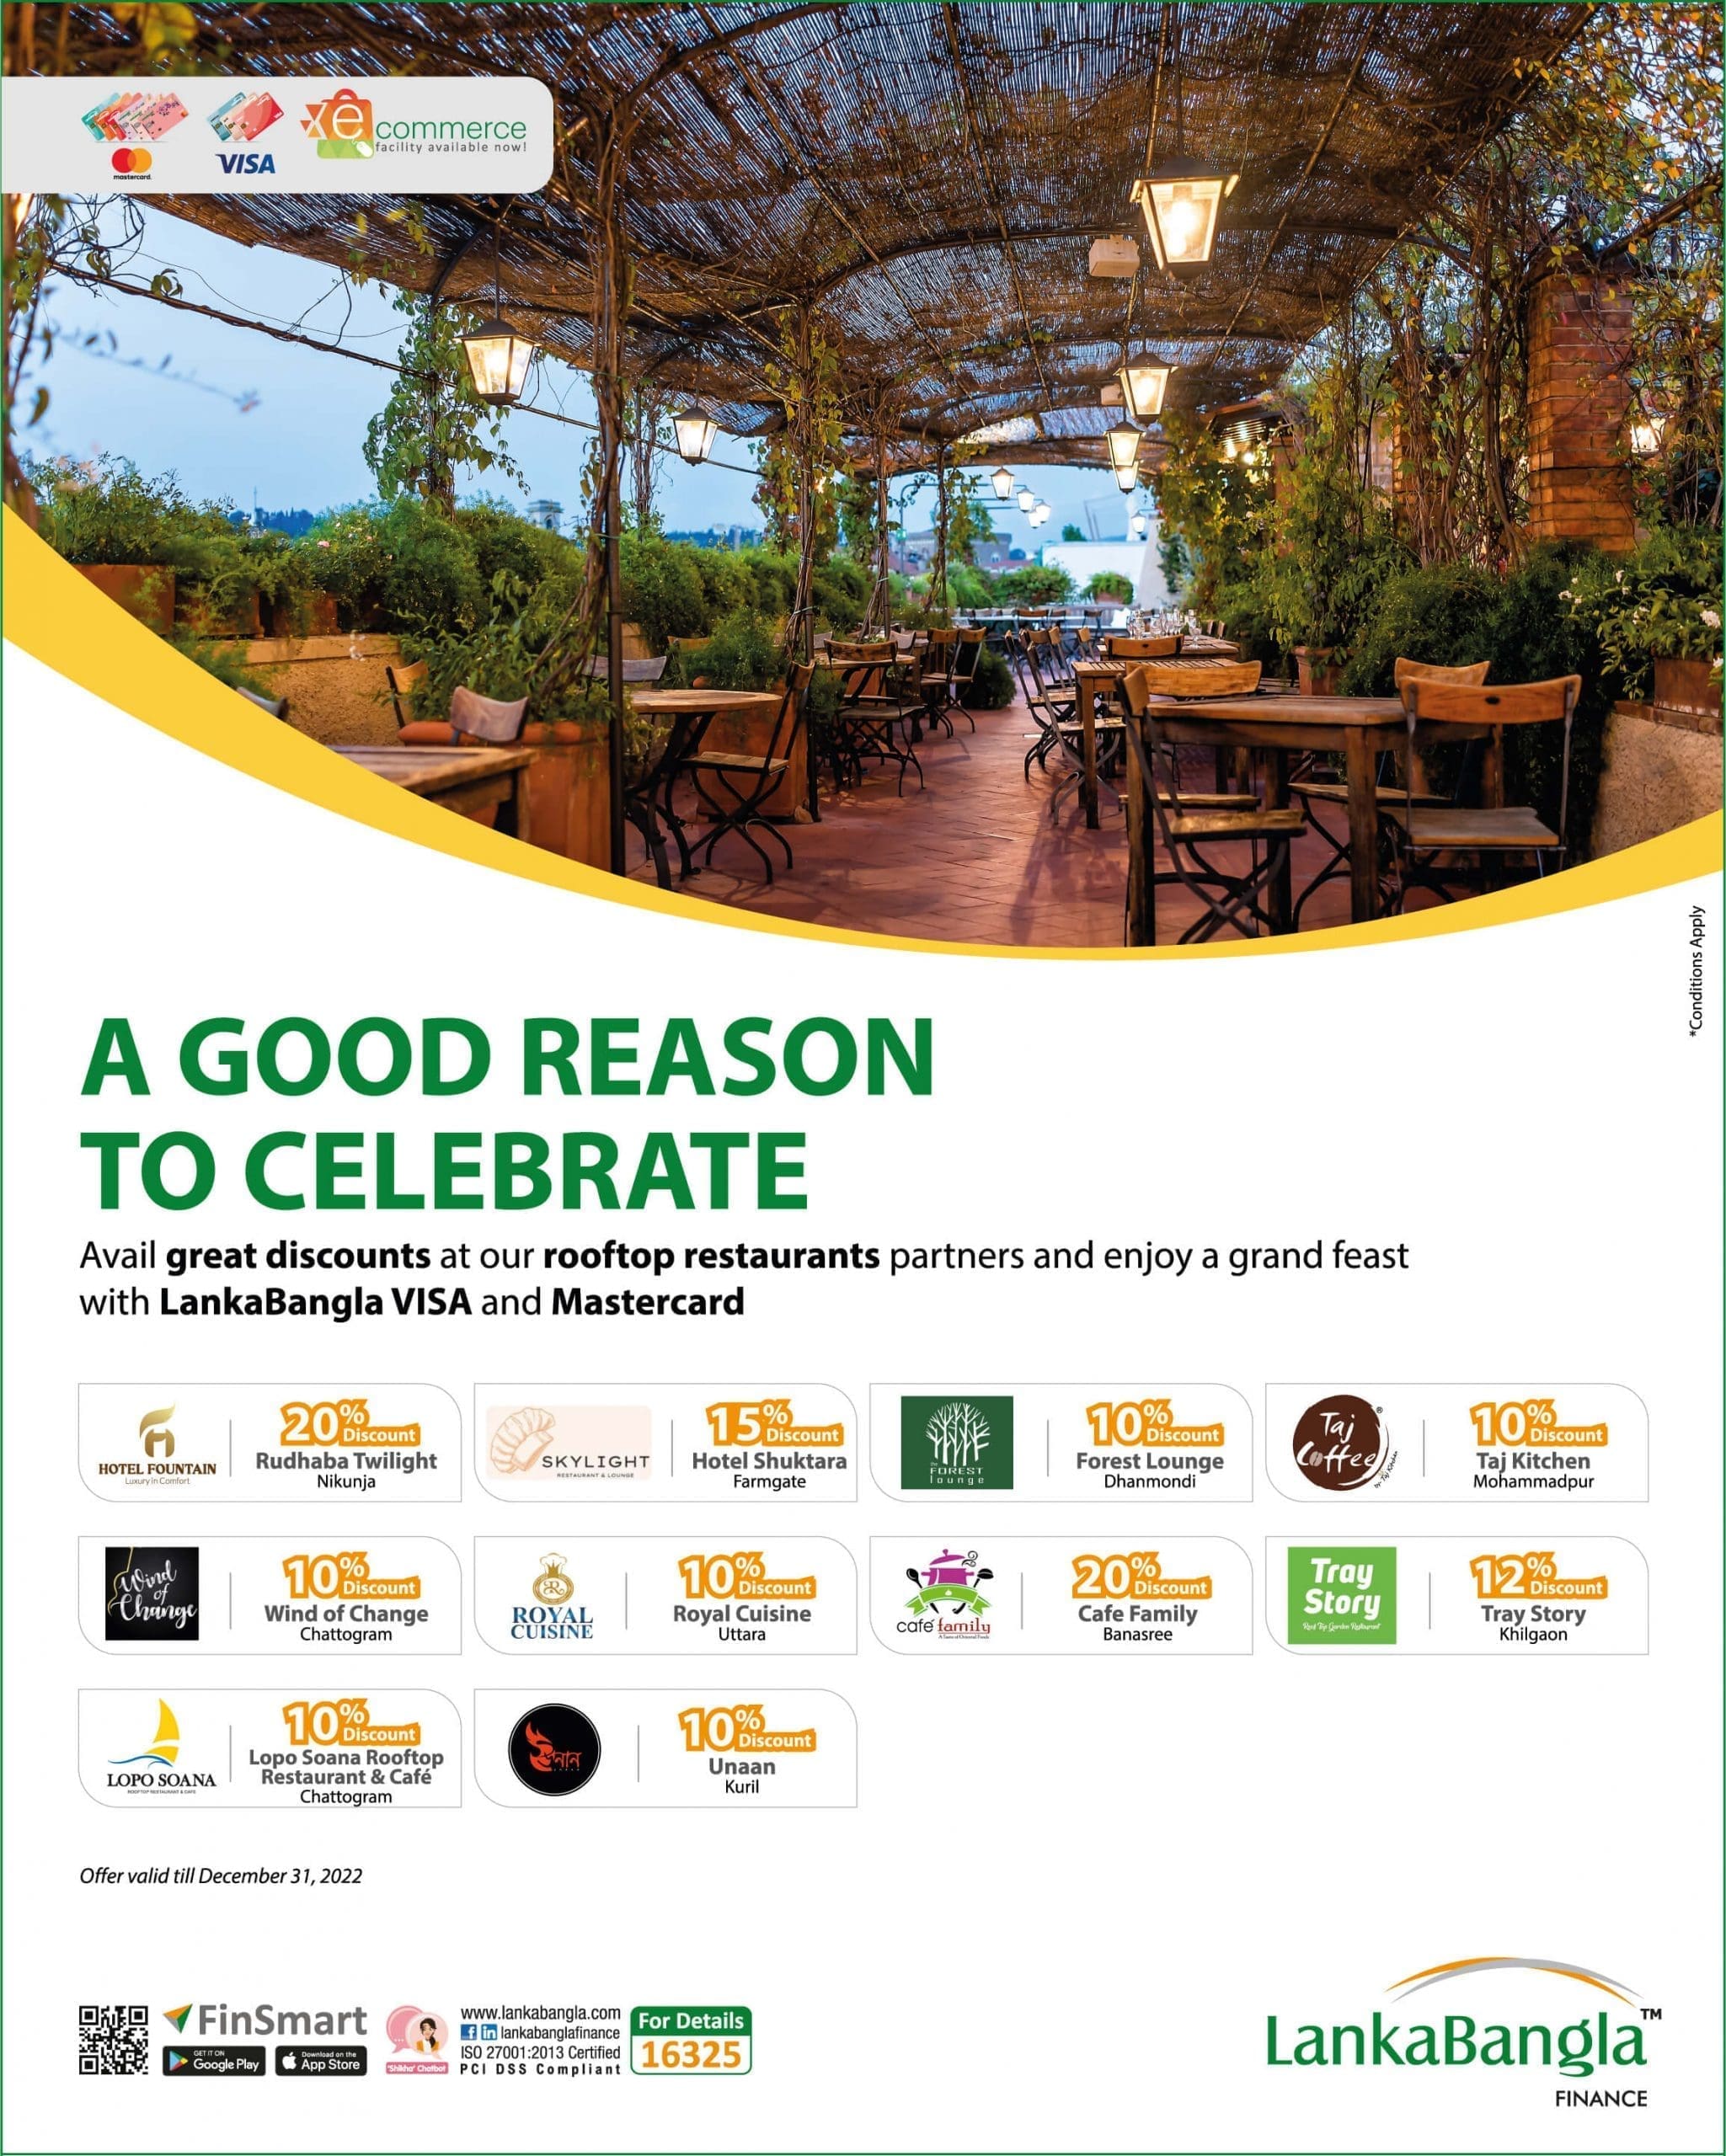 Discount at Rooftop Restaurant Partners